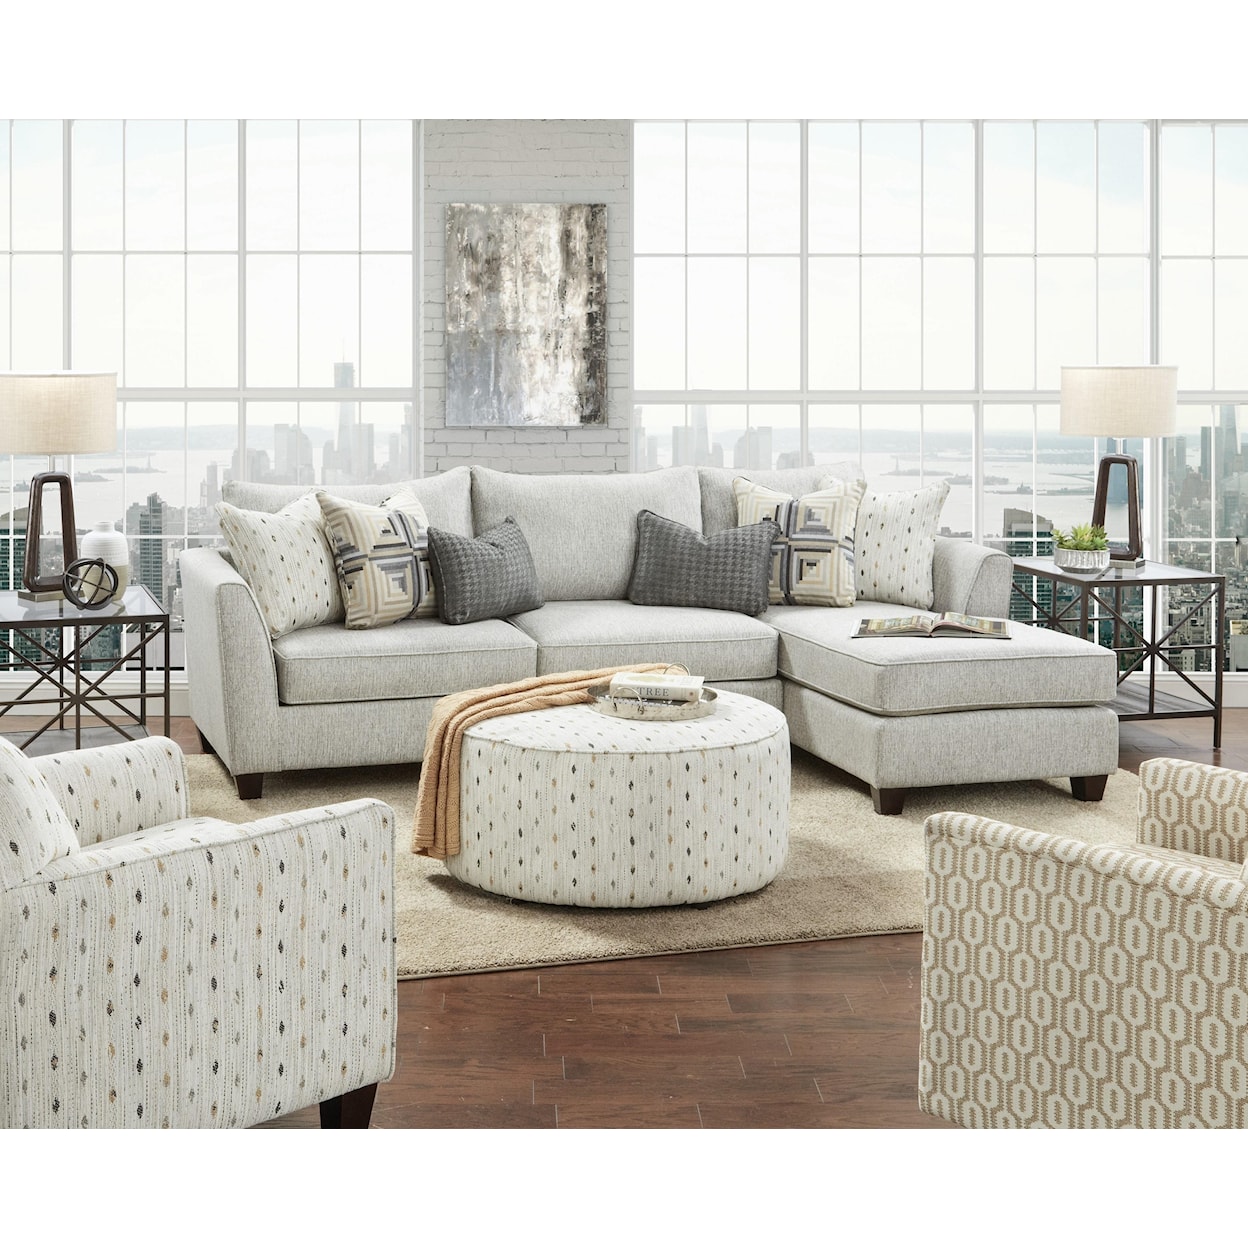 Fusion Furniture 28 PALM BEACH IRON 2 Piece Sectional